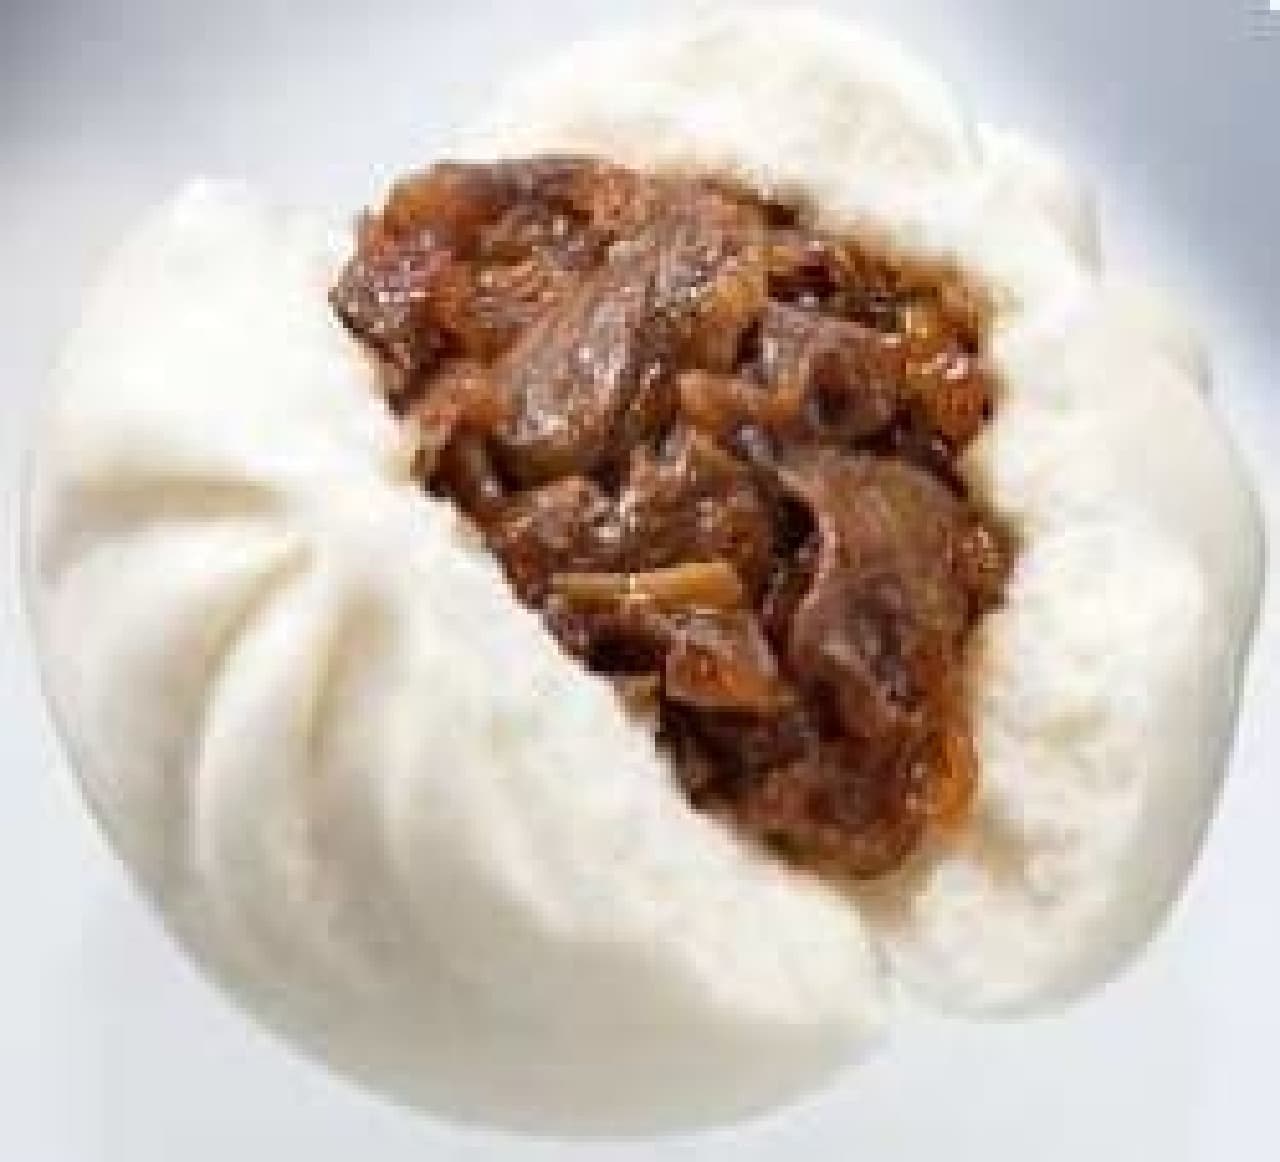 The most expensive Chinese steamed bun in Lawson history !? "Special Omi beef sukiyaki steamed bun"